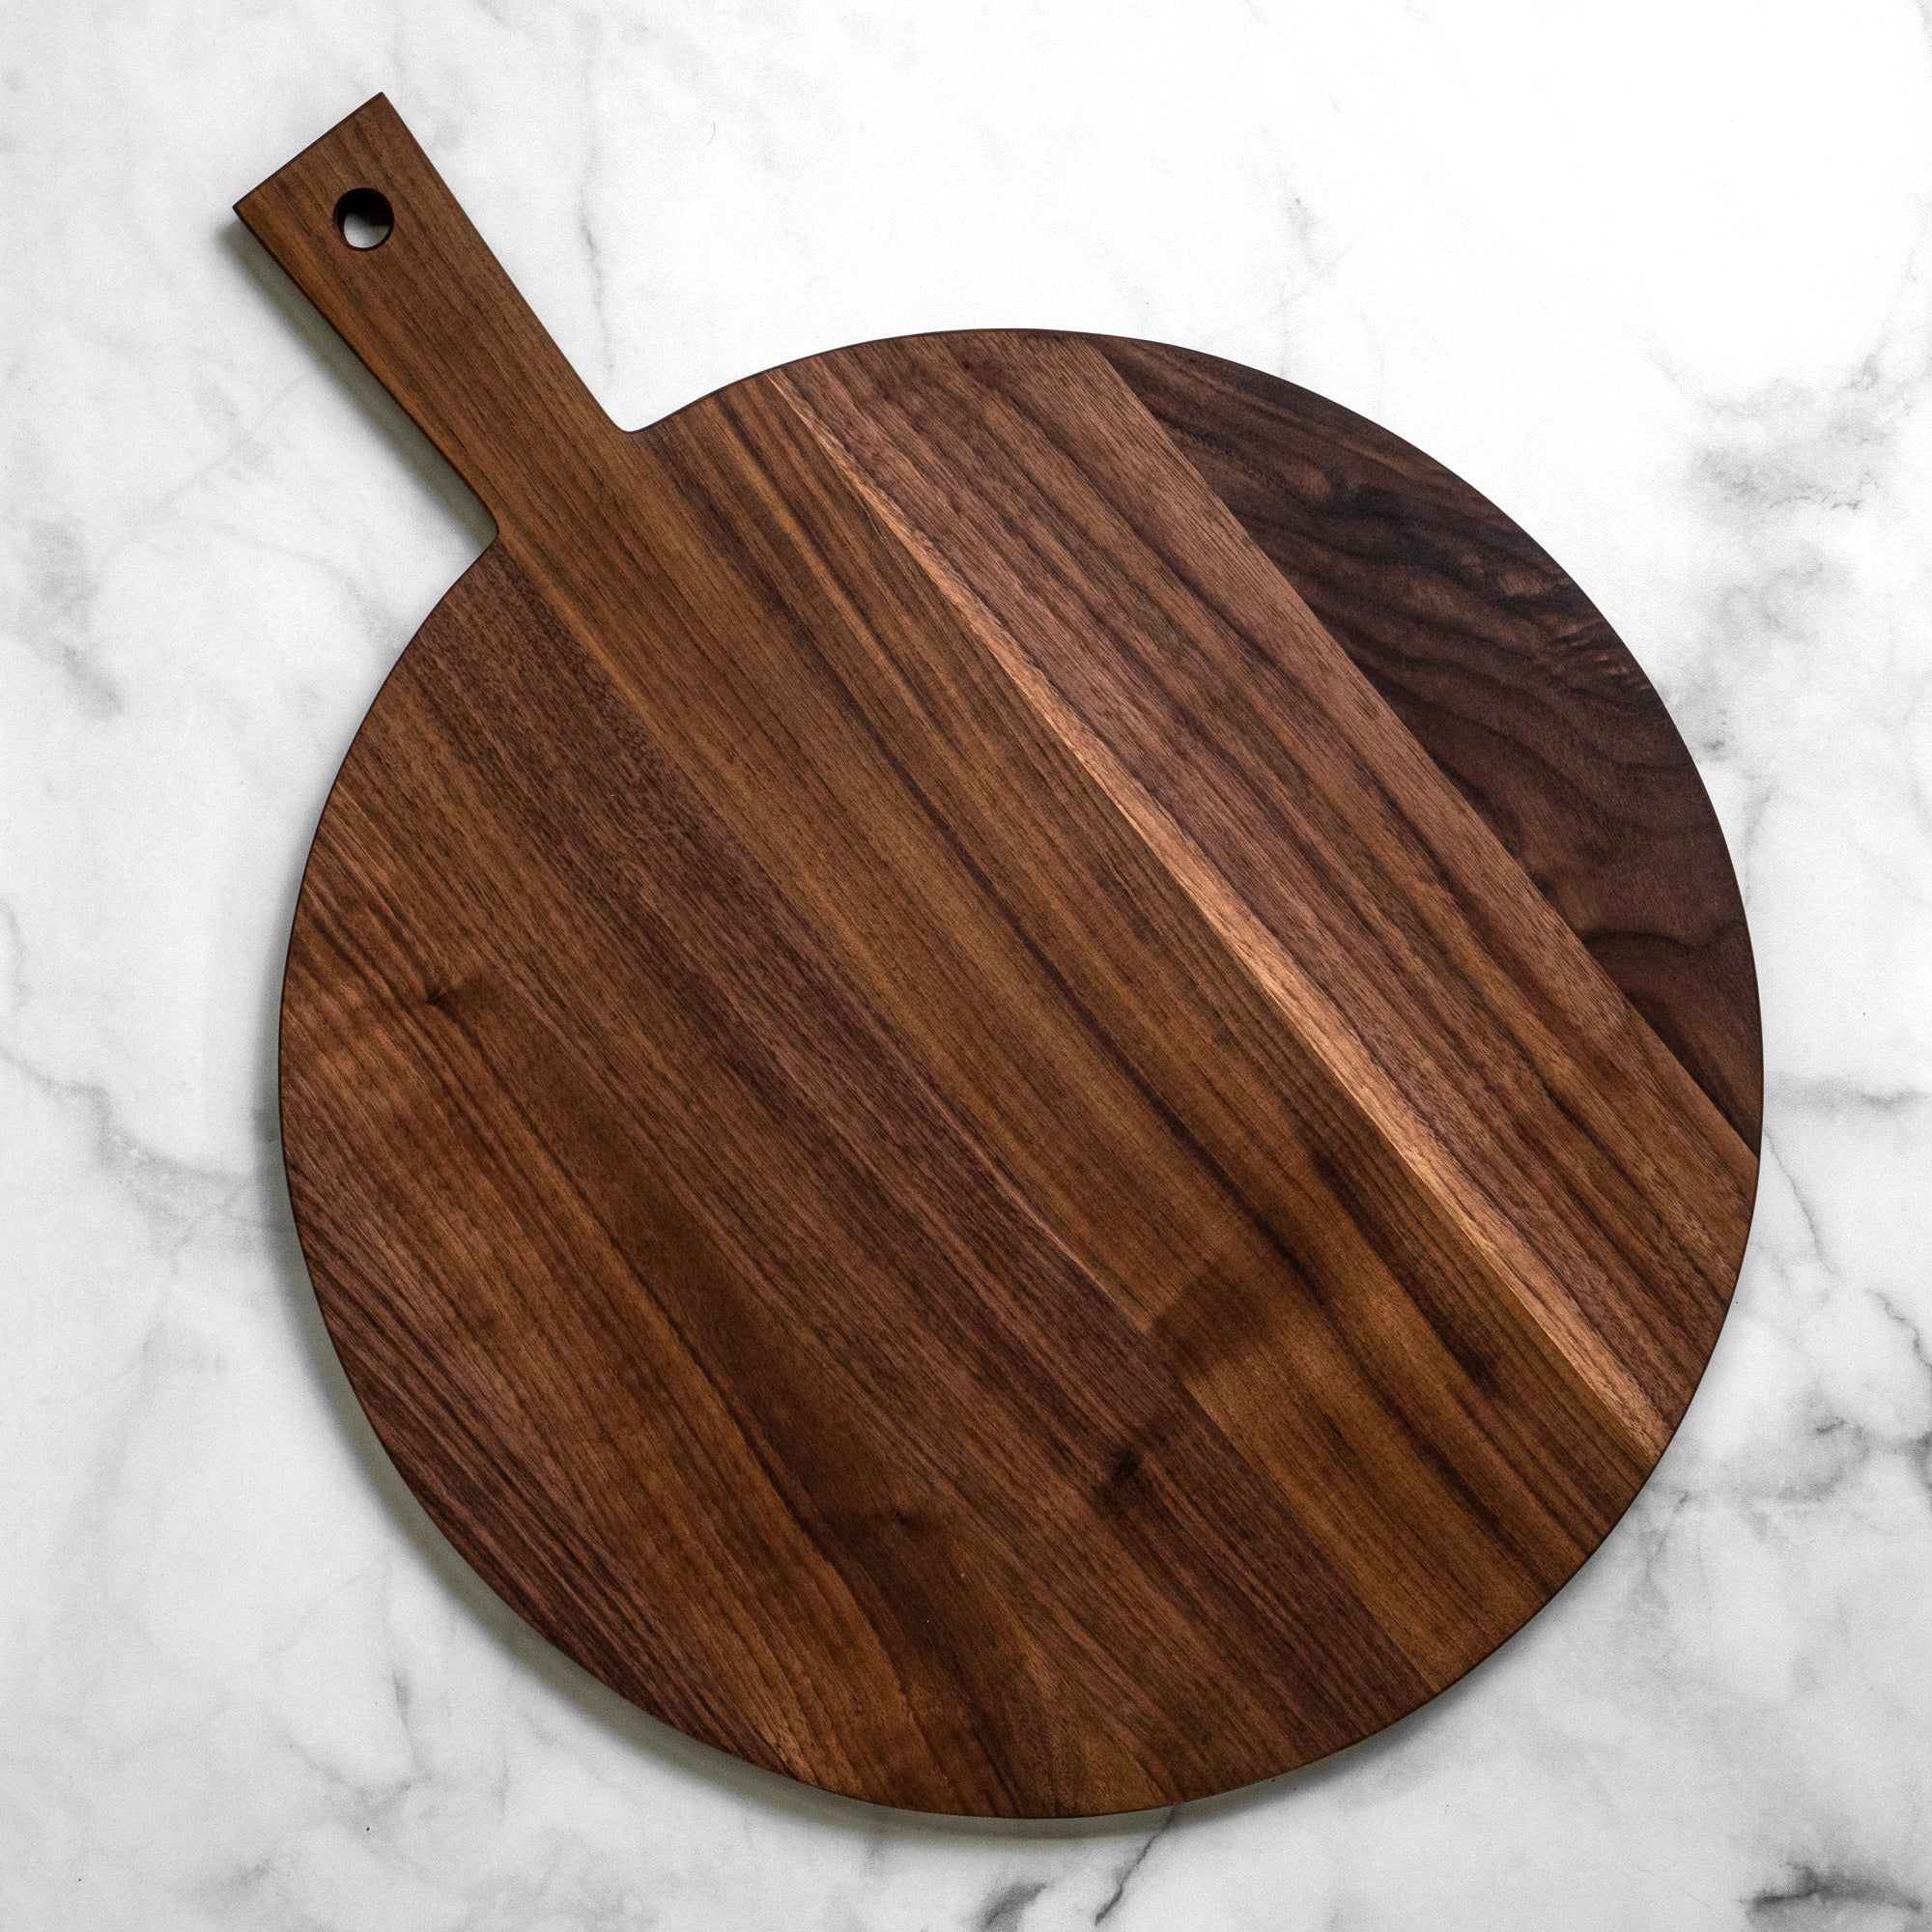 Serving Boards with Iron Handle Large - CAPERS Home